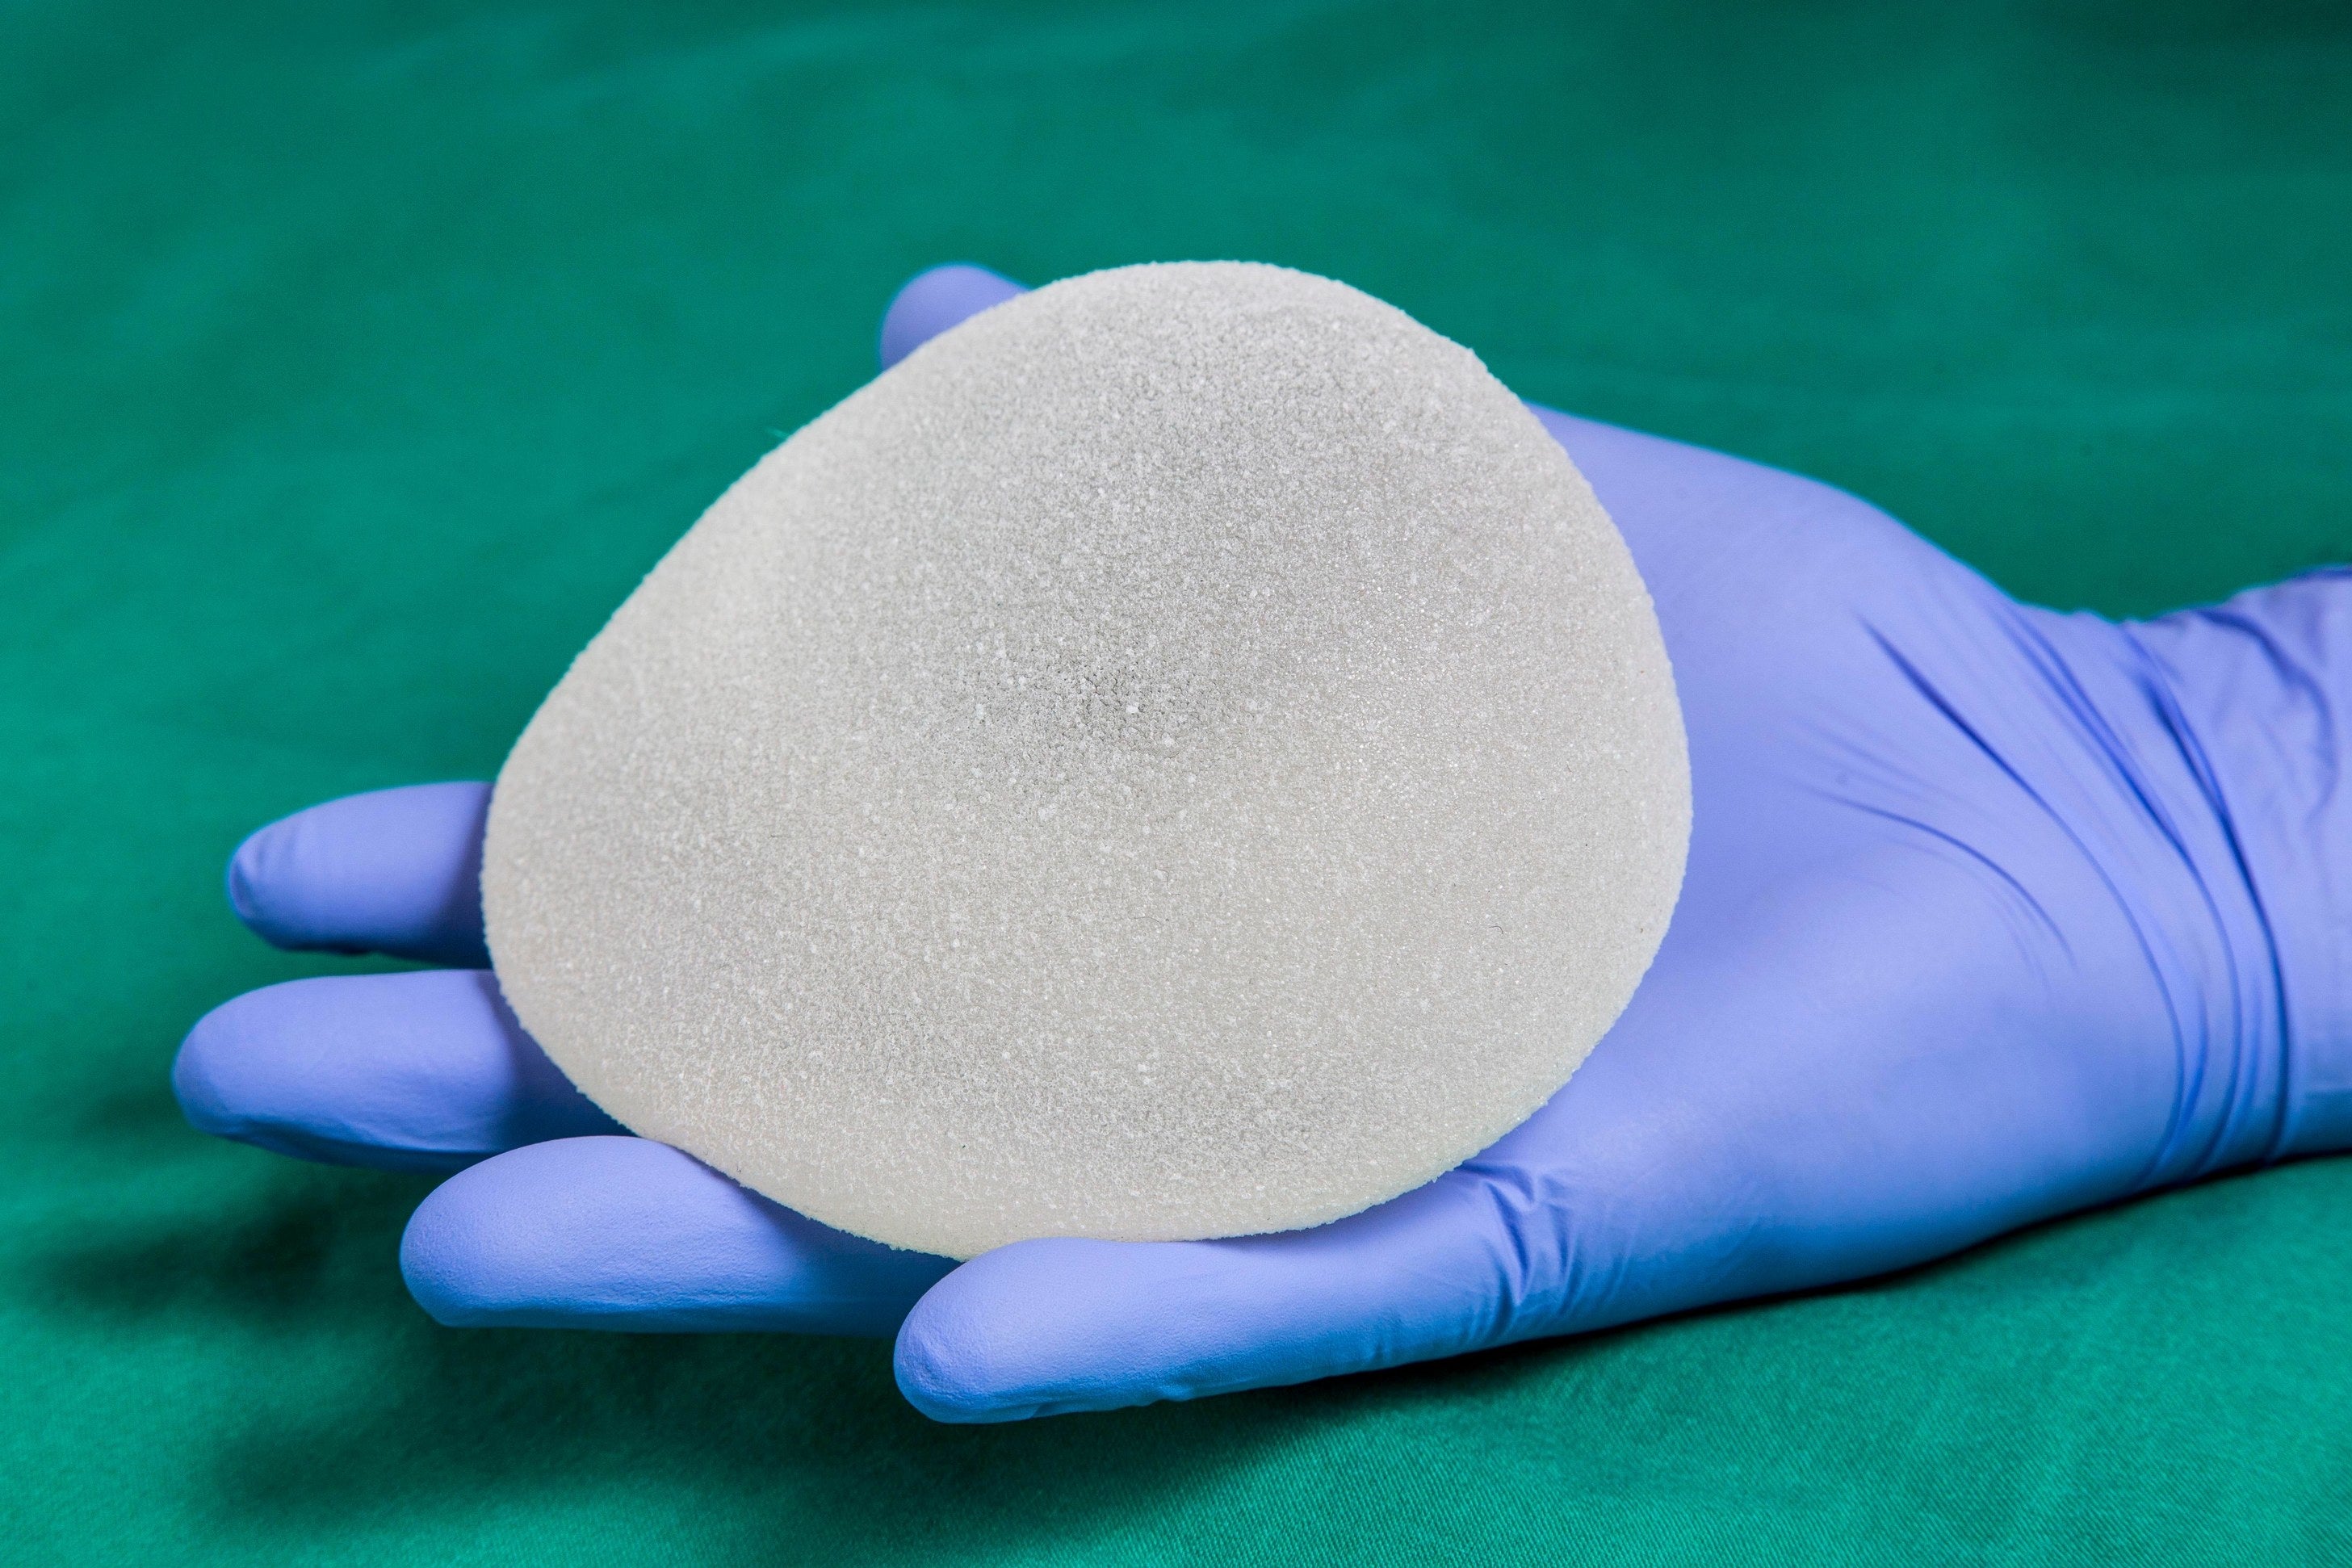 Breast Implants Aren’t Lifelong Devices And Can Cause Health Issues. Here’s What To Know.